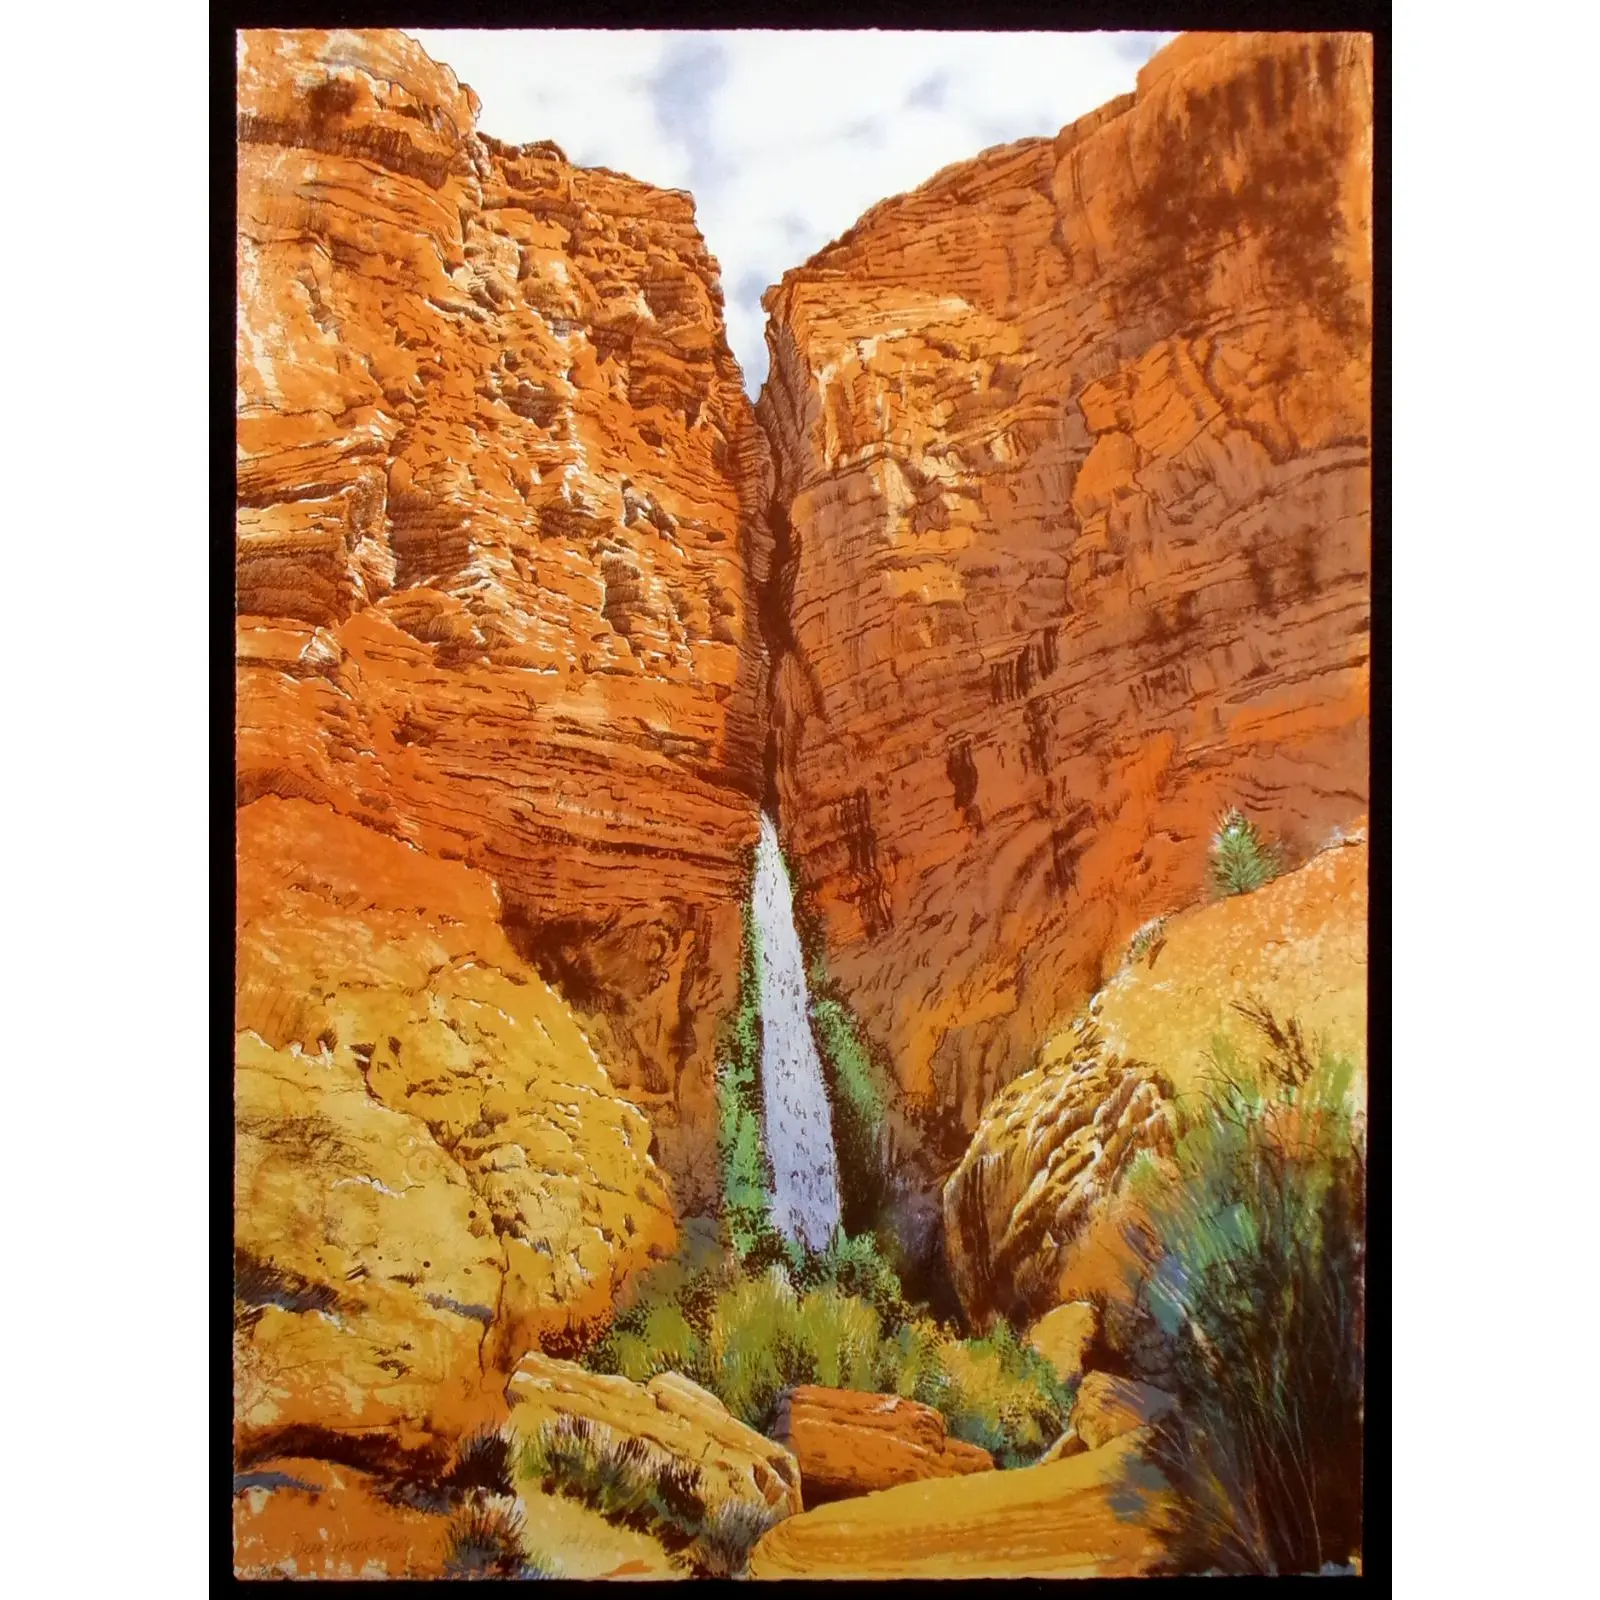 painting of Deer Creek Falls in Grand Canyon, created in the early 1980s by artist Merrill Mahaffey